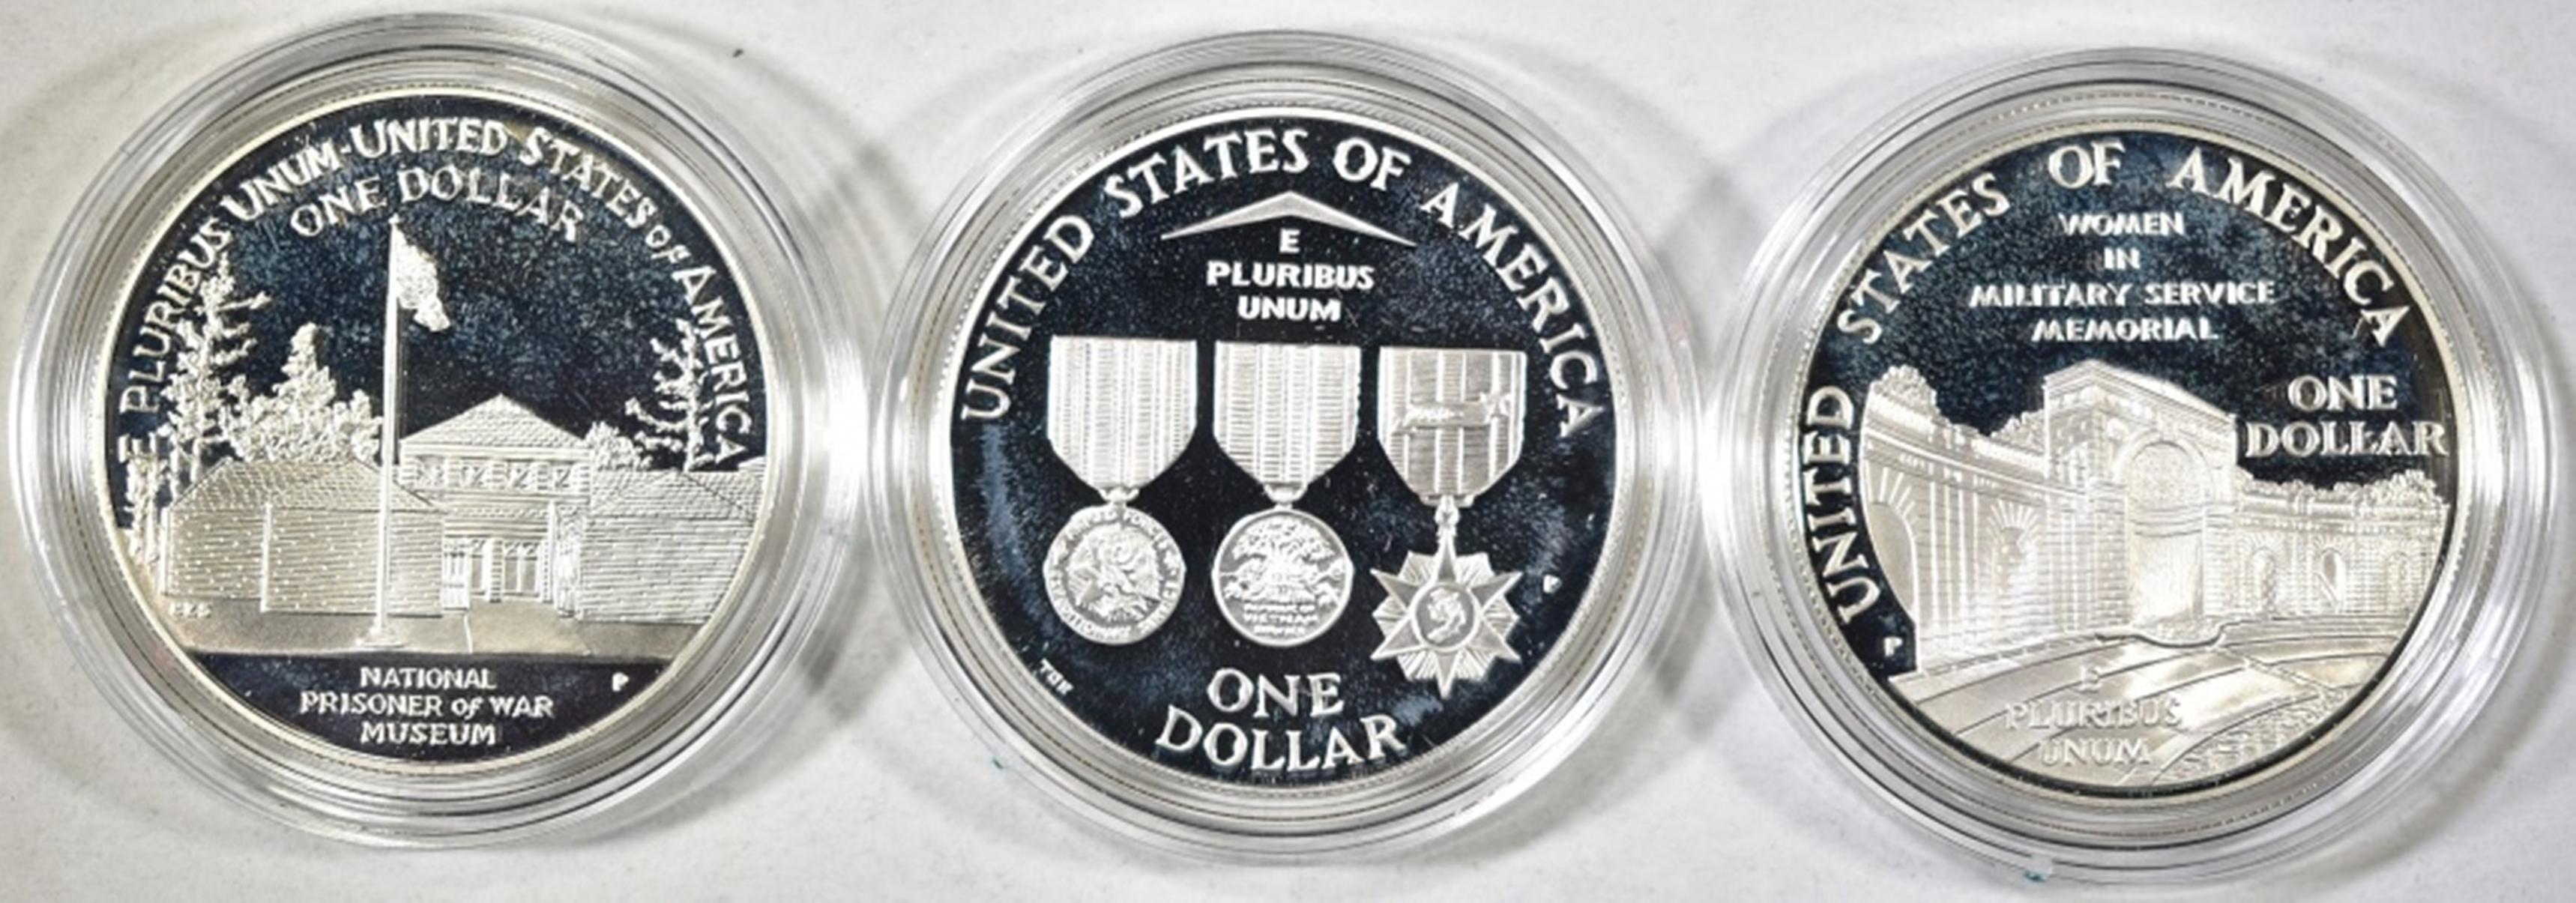 1994 U.S. VETS PROOF 3-COIN SILVER DOLLAR SET